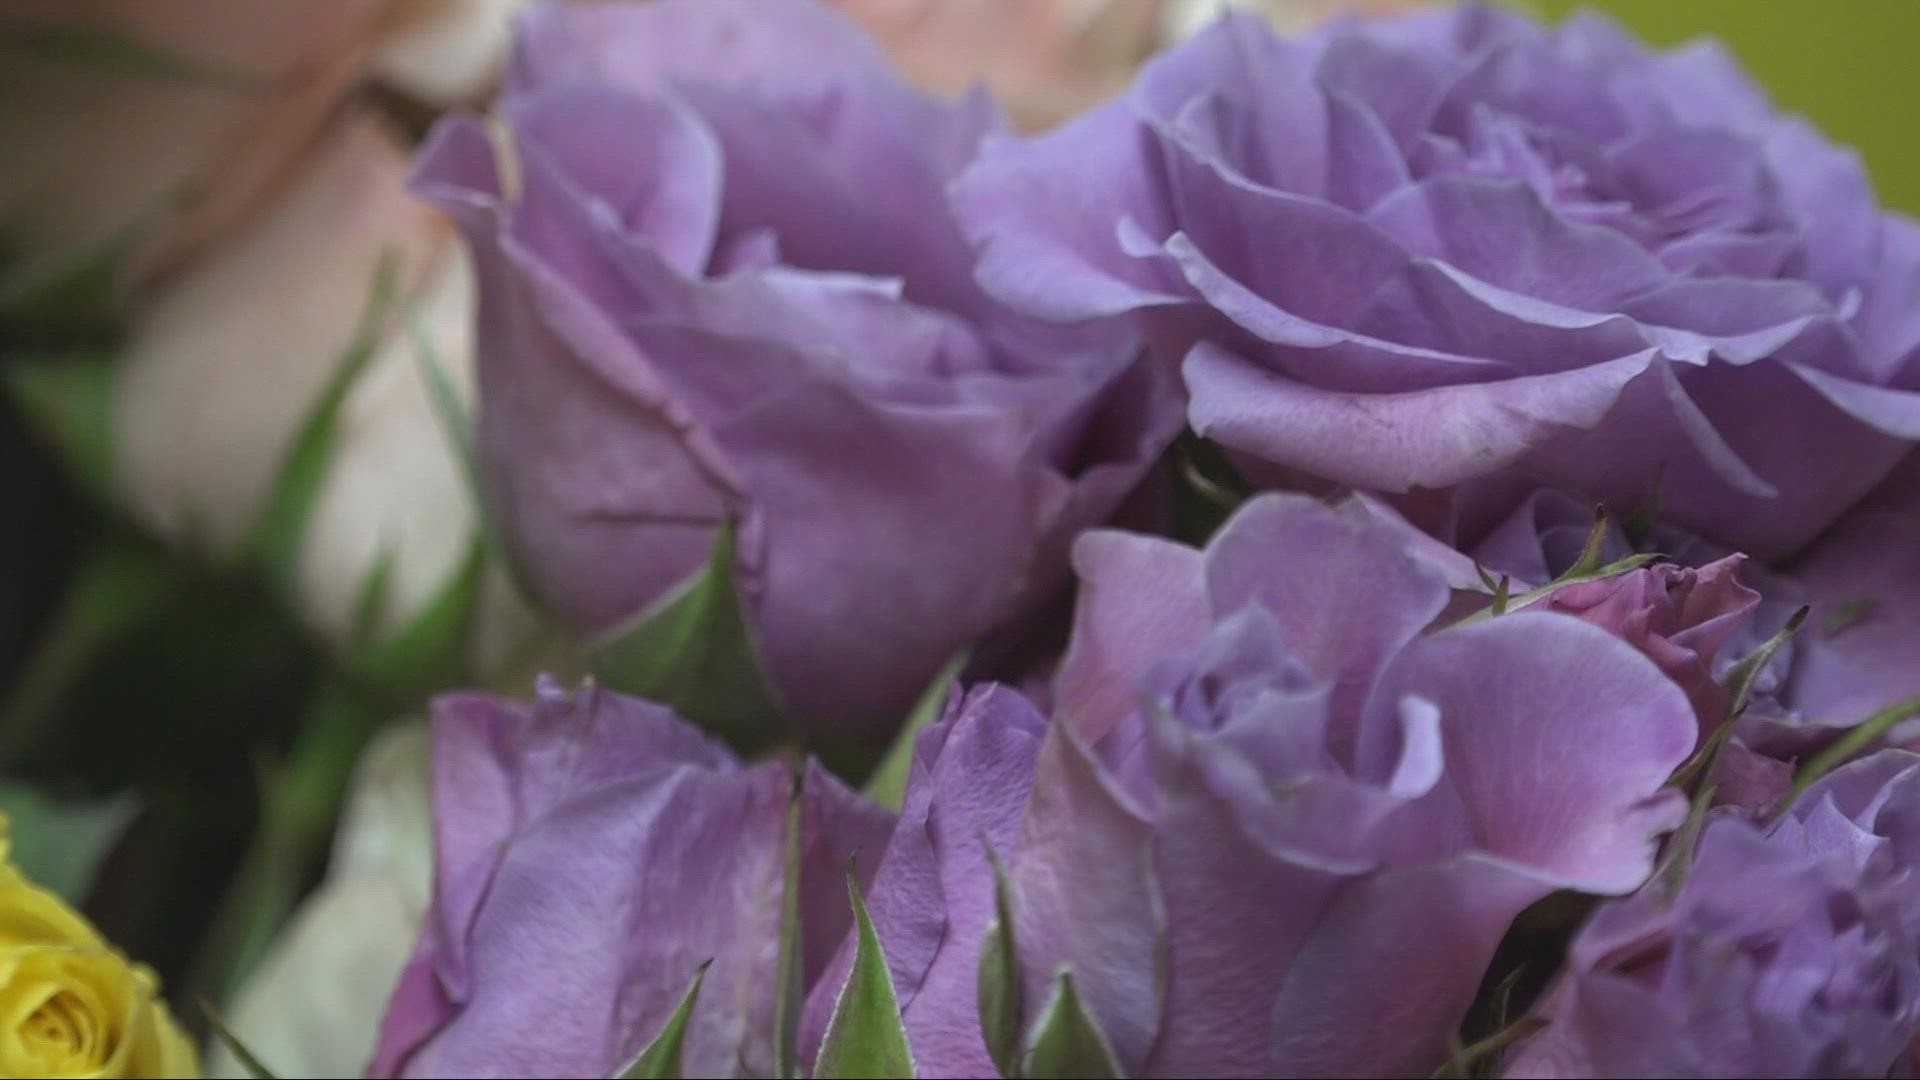 A flower shortage along with increasing demand has prices rising throughout the country.